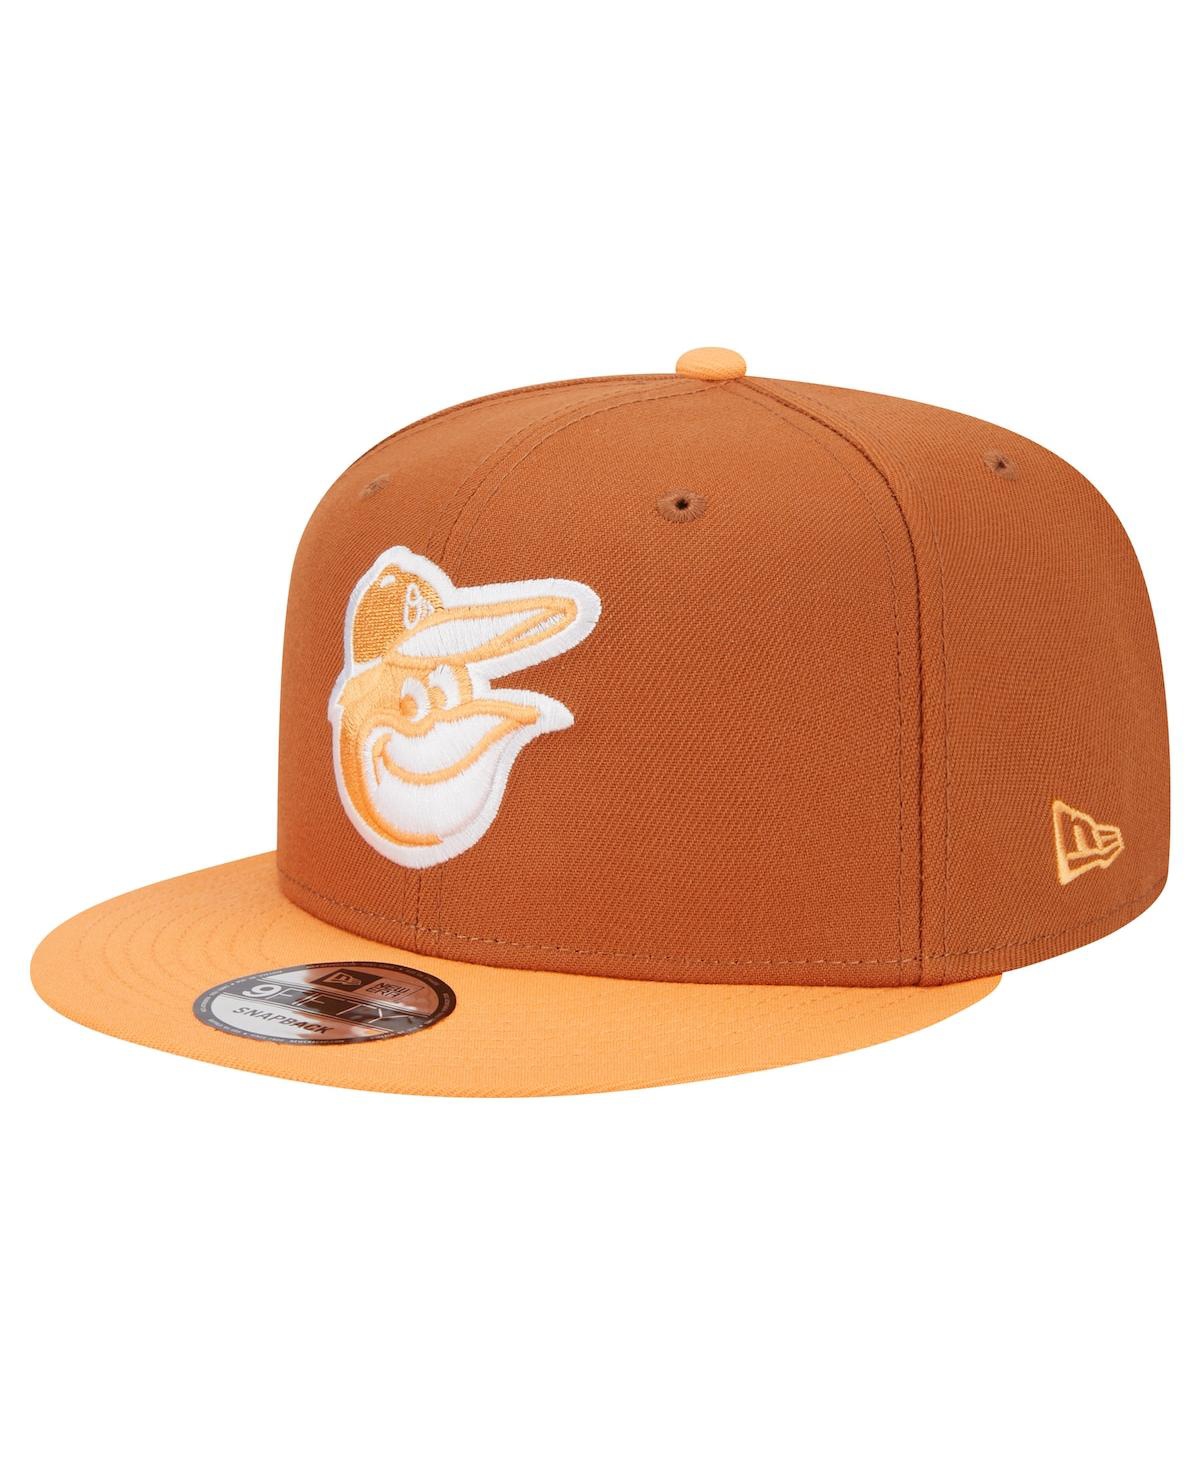 Men's Brown Baltimore Orioles Spring Color Two-Tone 9FIFTY Snapback Hat - Brown